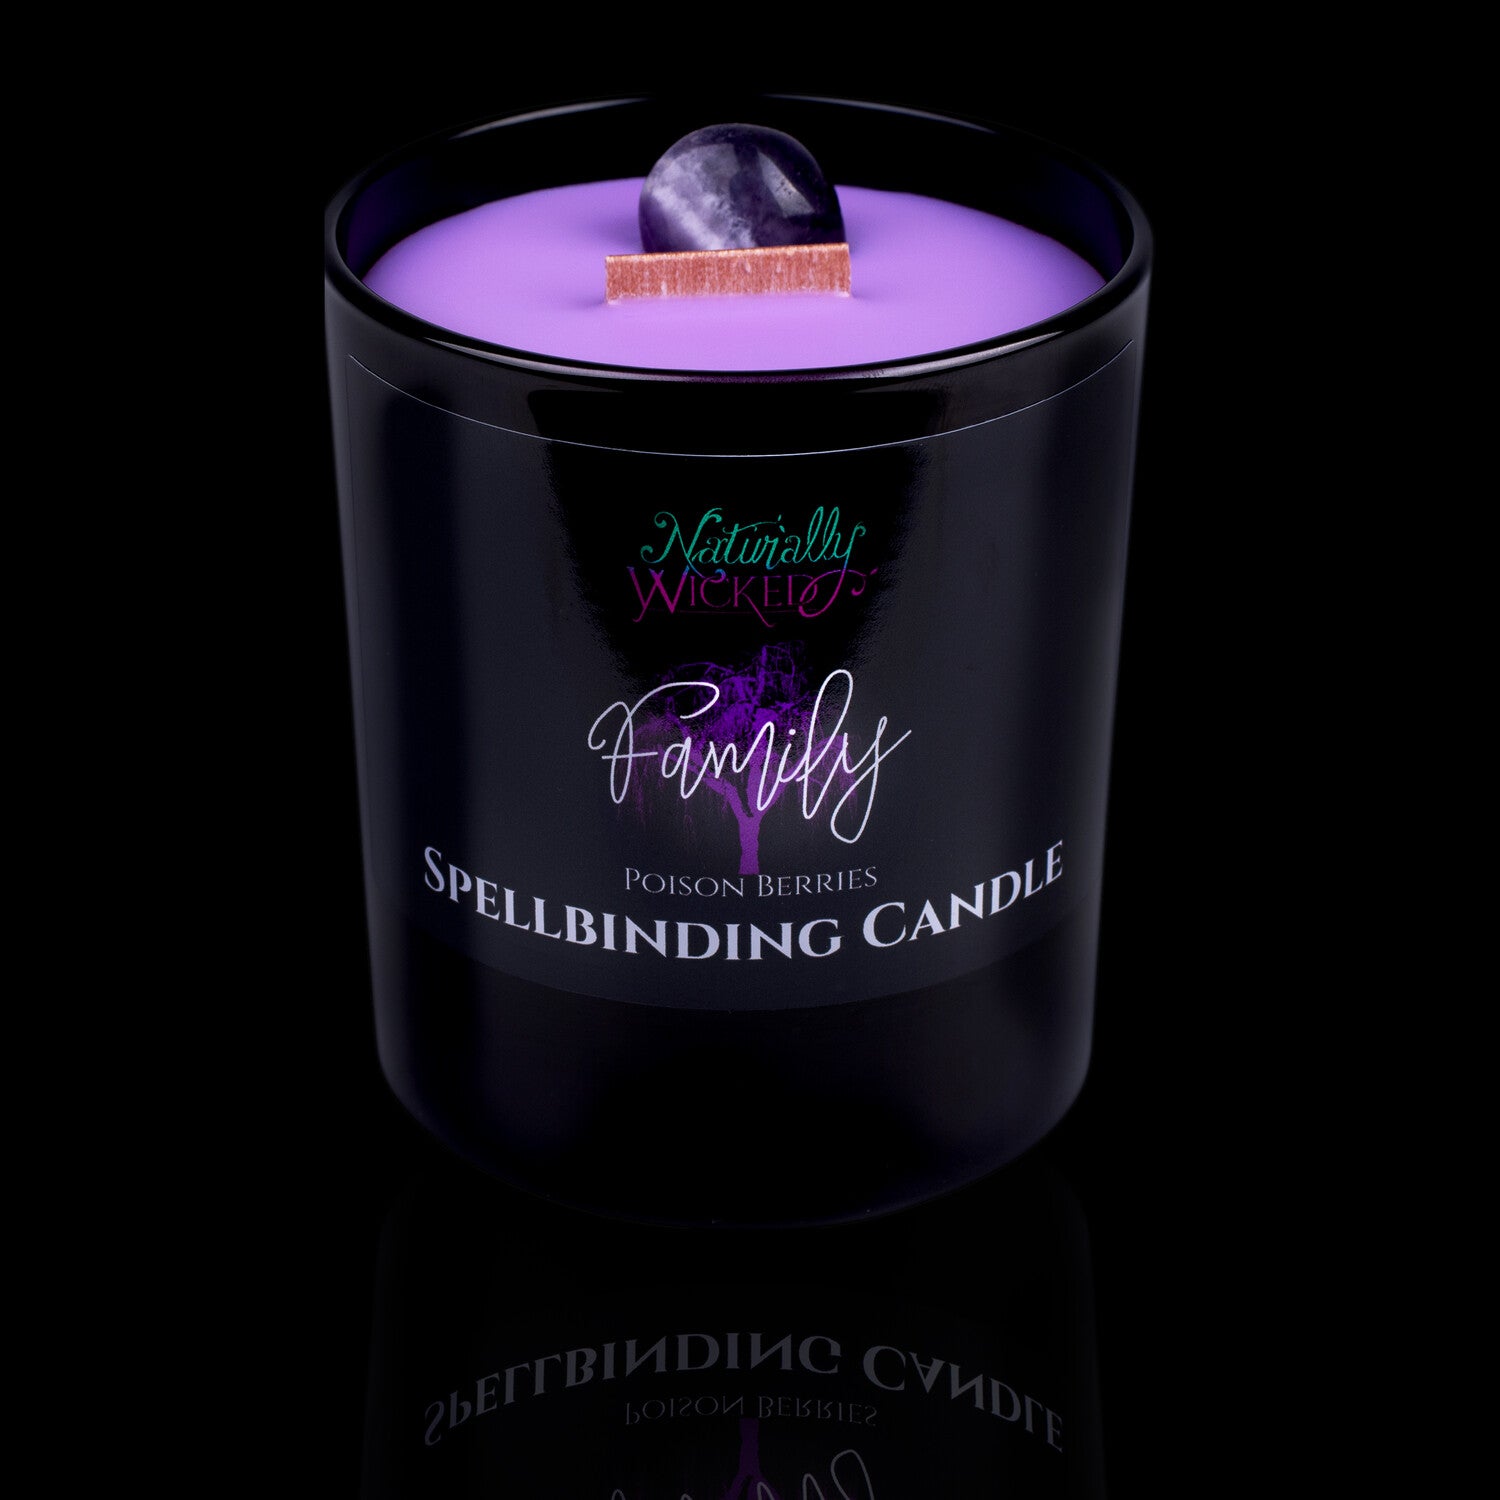 A Unique Family Gift. Naturally Wicked Spellbinding Family Crystal Candle Entombed In Purple Plant-Based Wax With Crackling Wood Wick & Agate Crystal